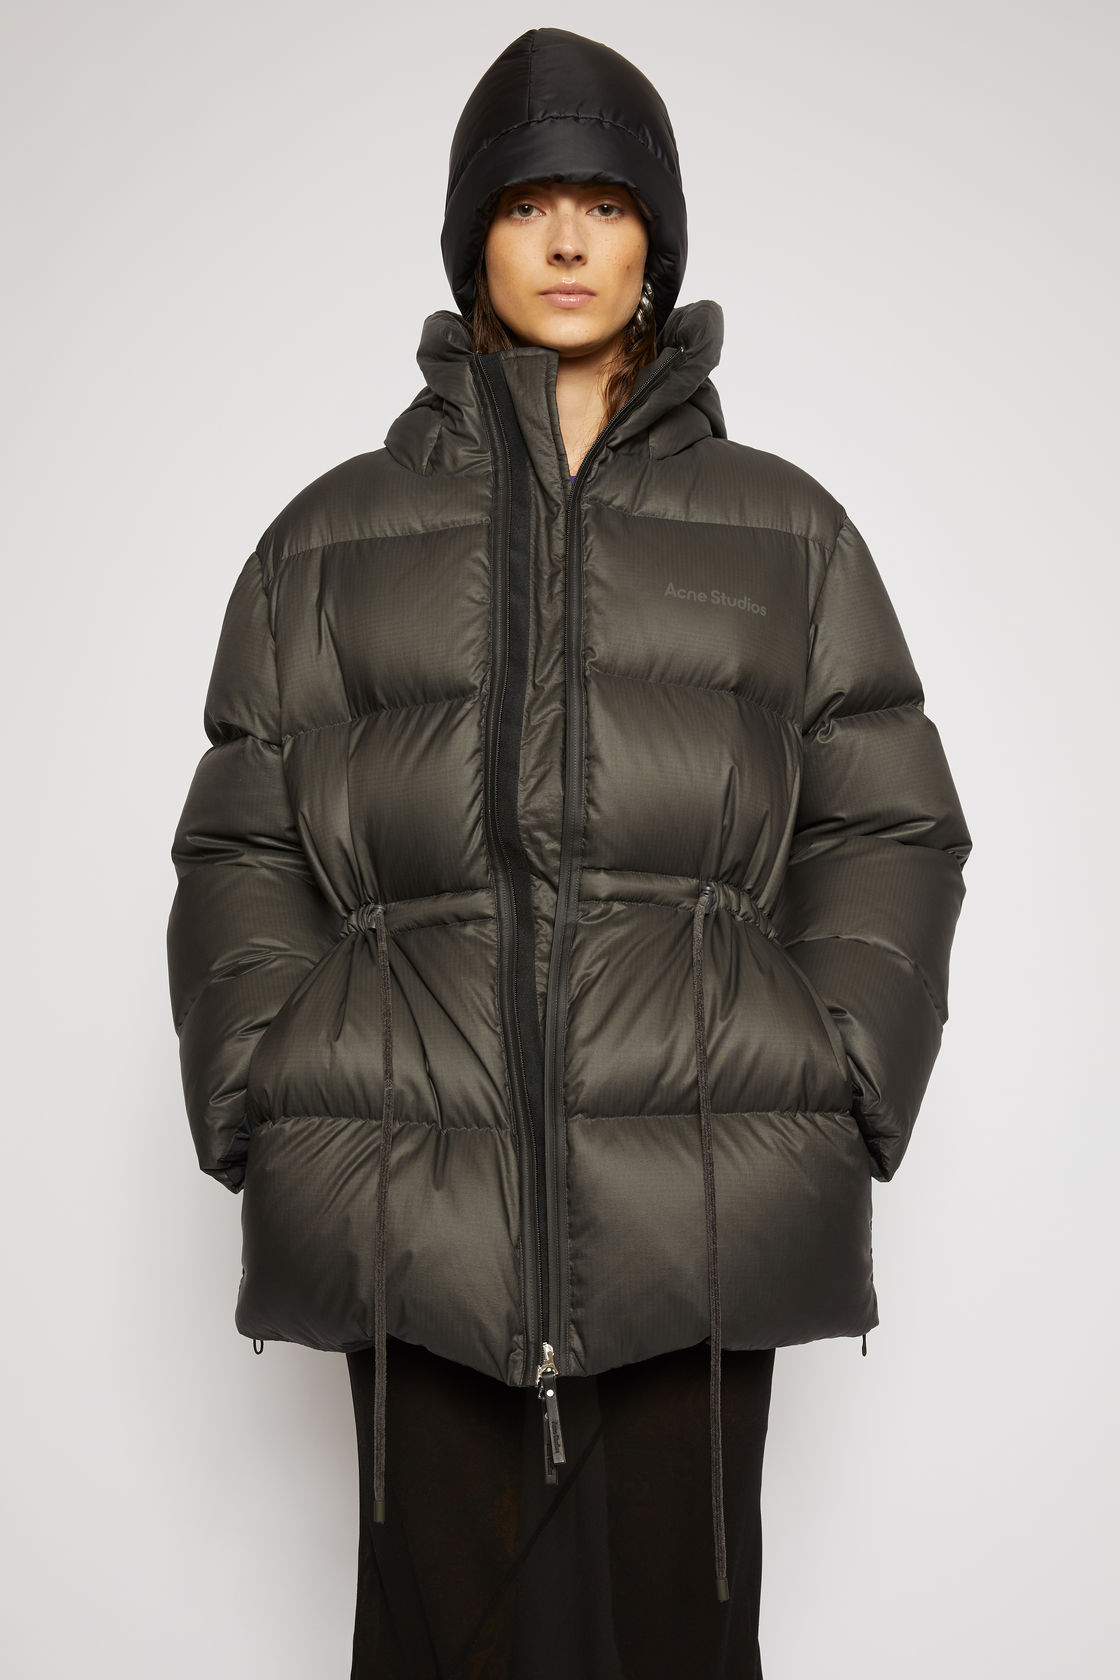 Acne Studios' FW20 Puffer Jackets Feature Recycled Down